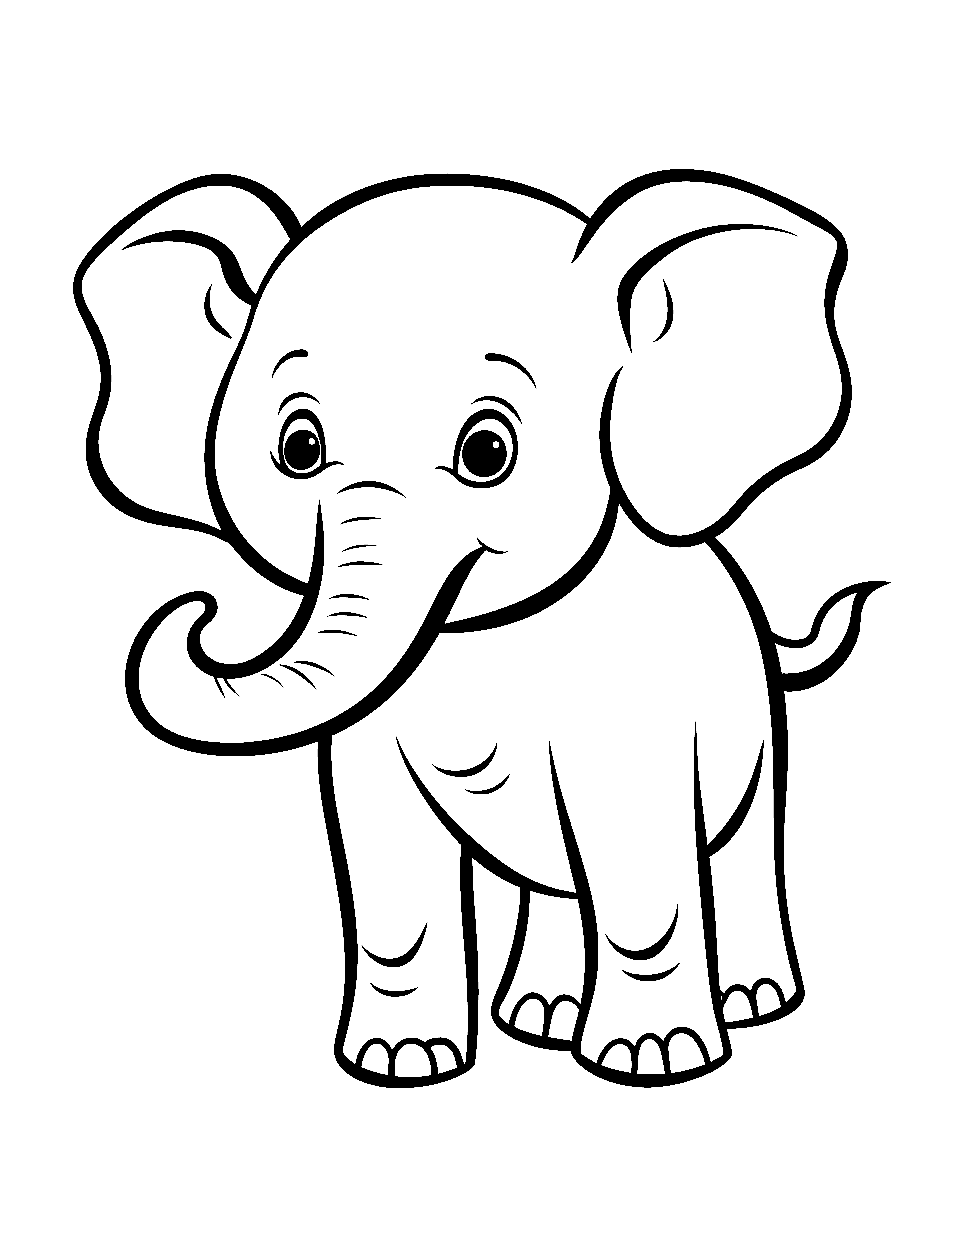 Cute Elephant Sitting Coloring Page - A cute baby elephant standing.